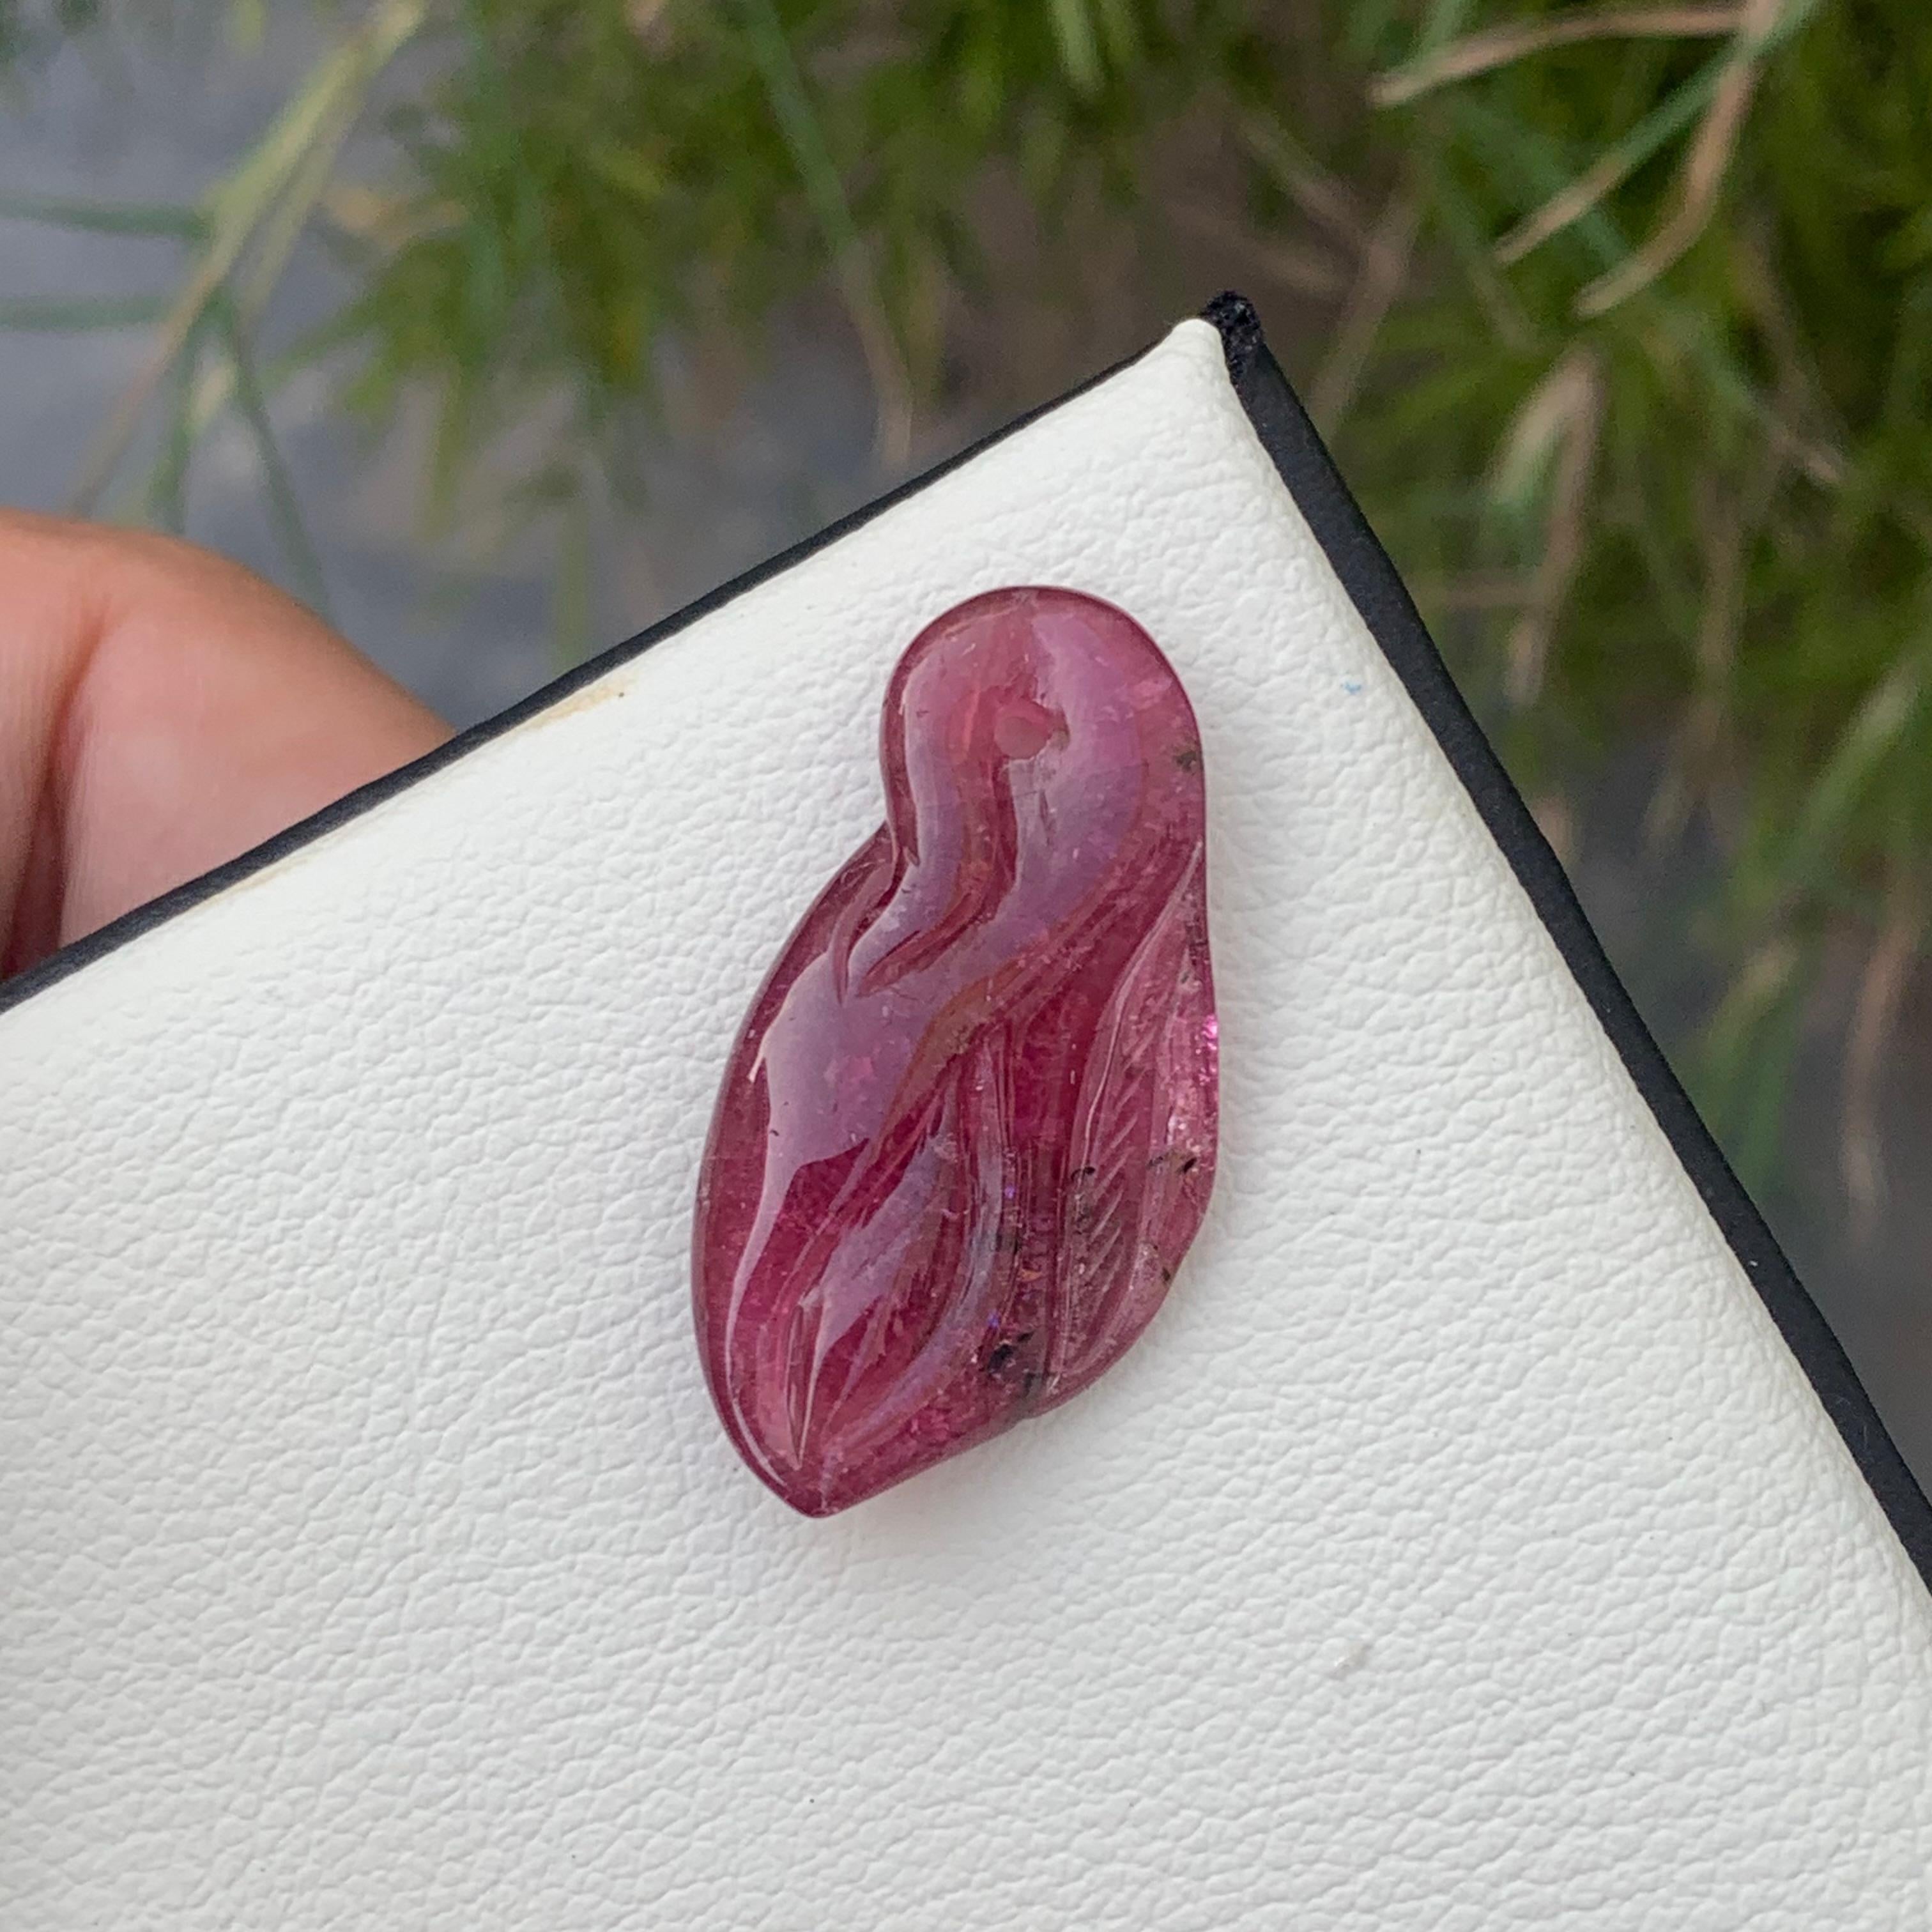 18th Century and Earlier 13.70 Carat Glamorous Rubellite Tourmaline Drilled Craving from Africa For Sale